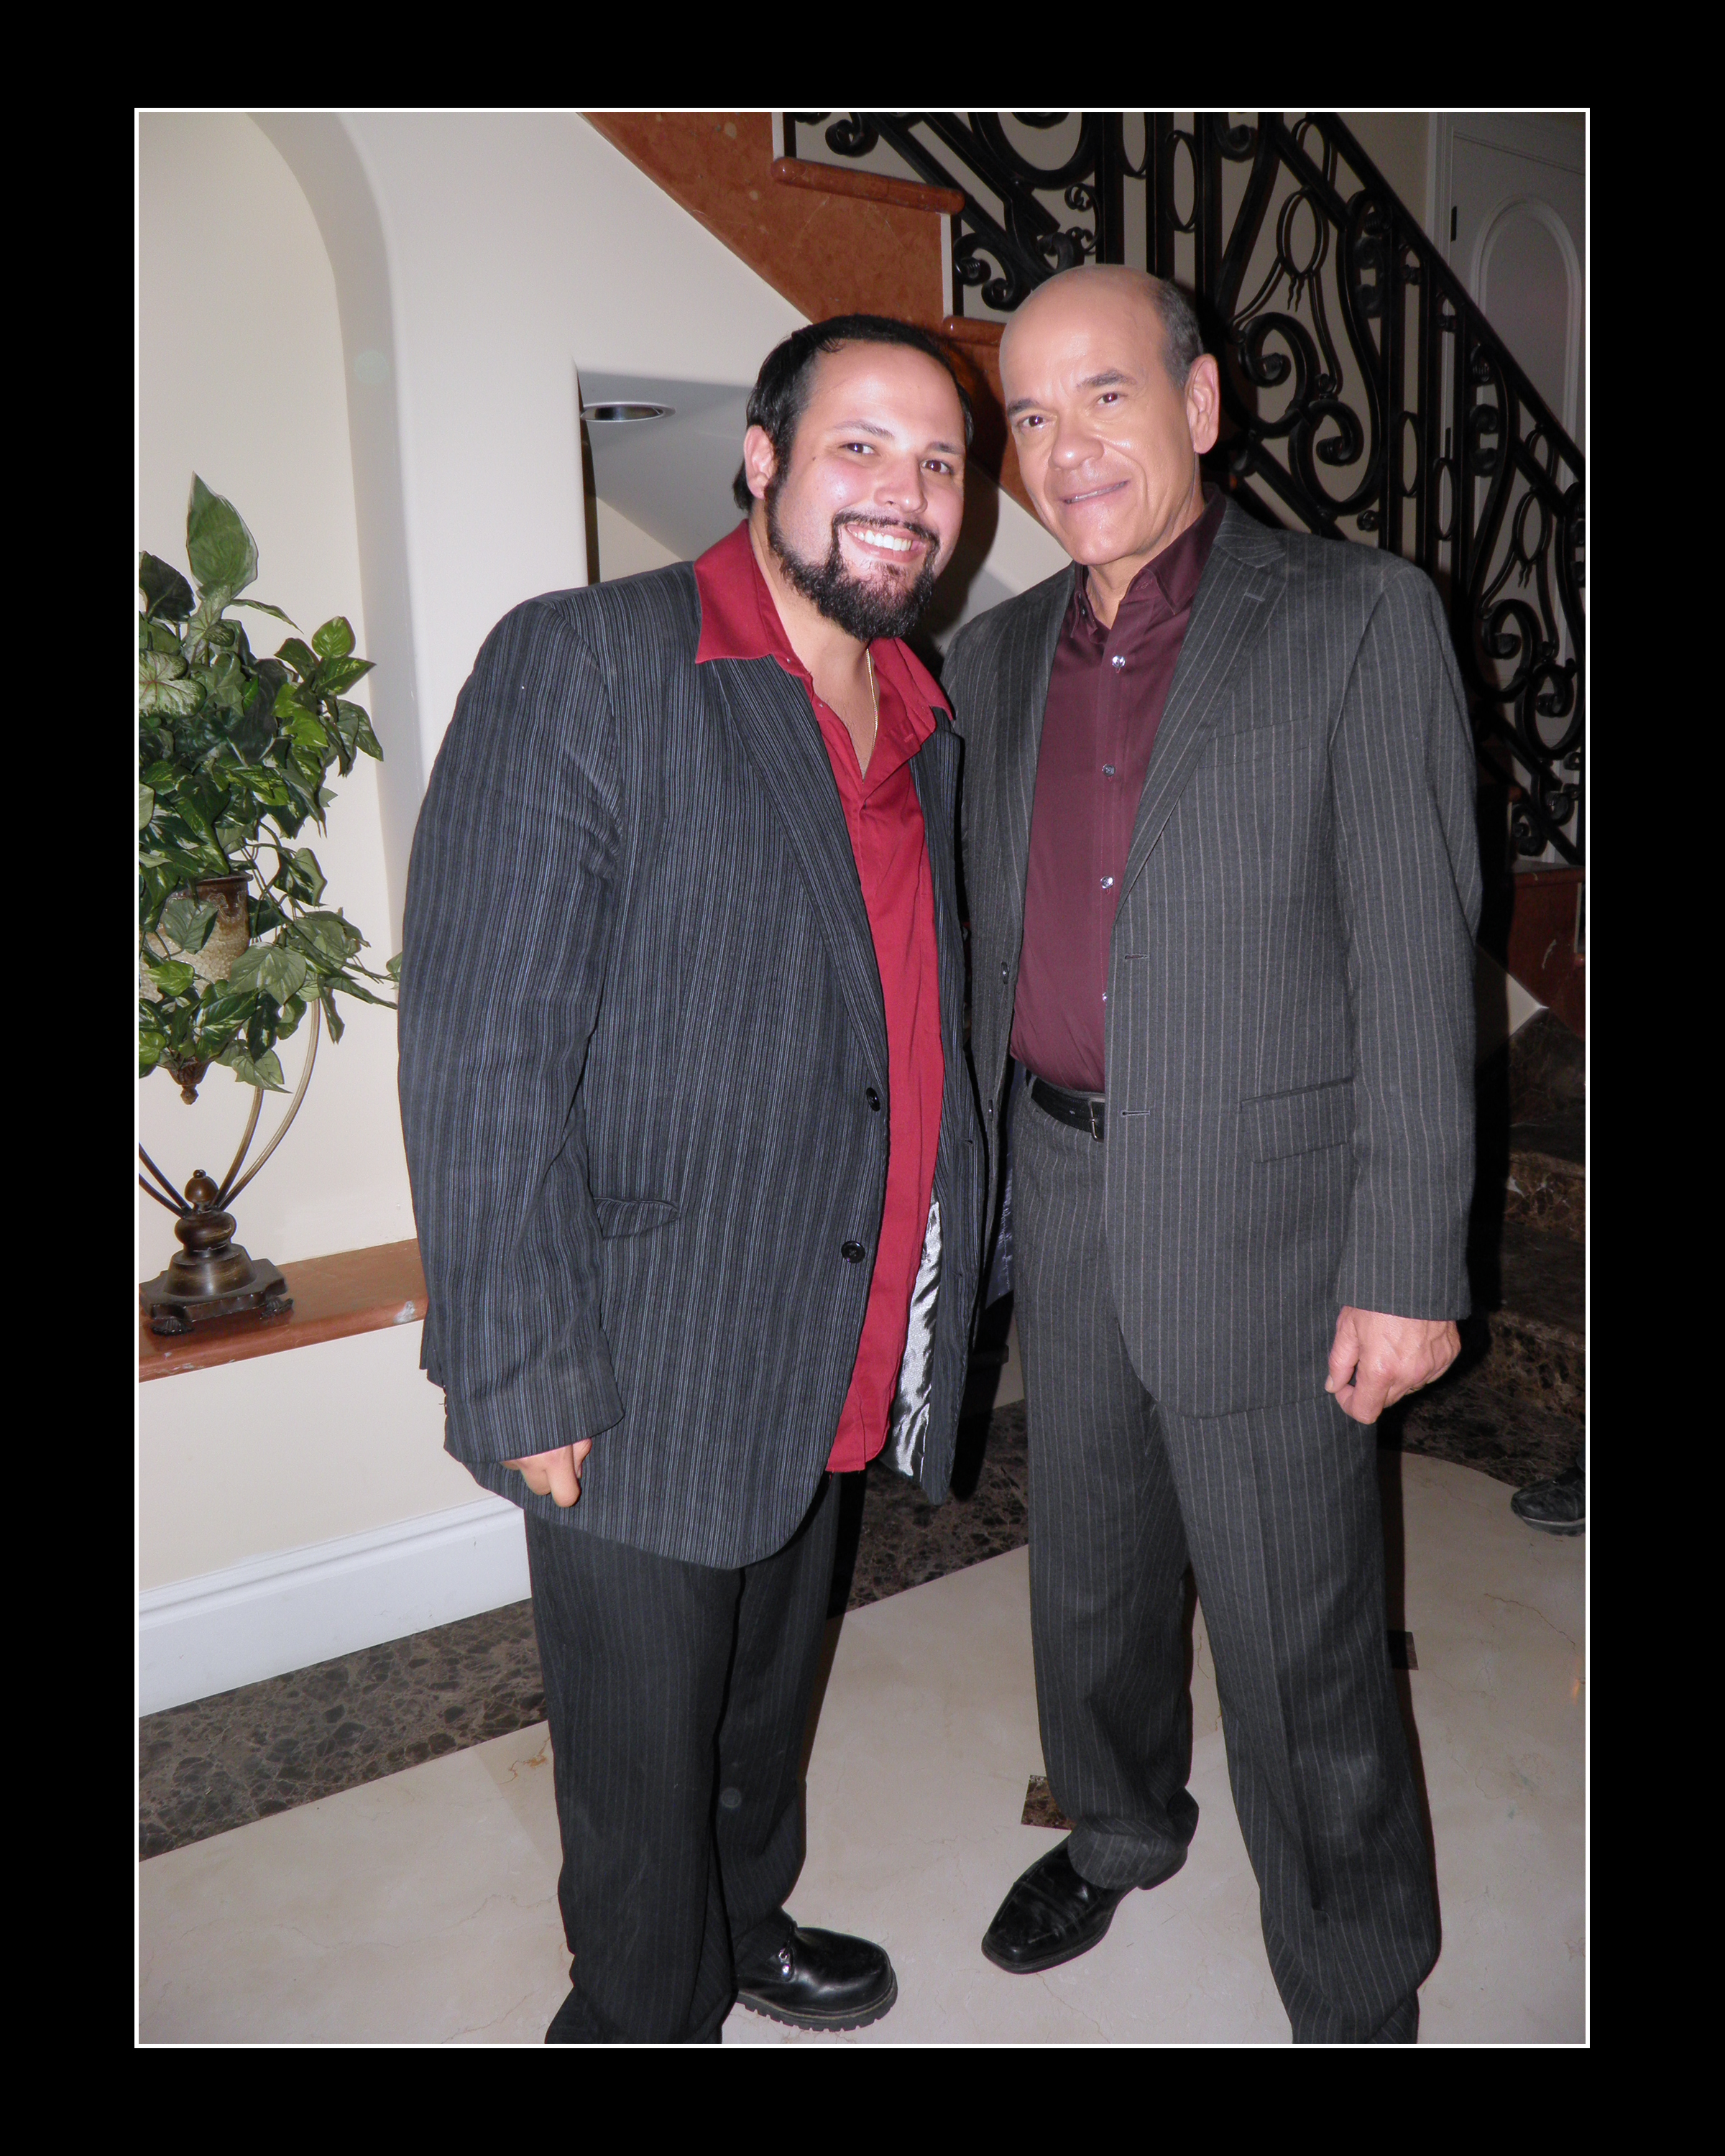 Mike Quiroga and Robert Picardo from Mansion of Blood film location.